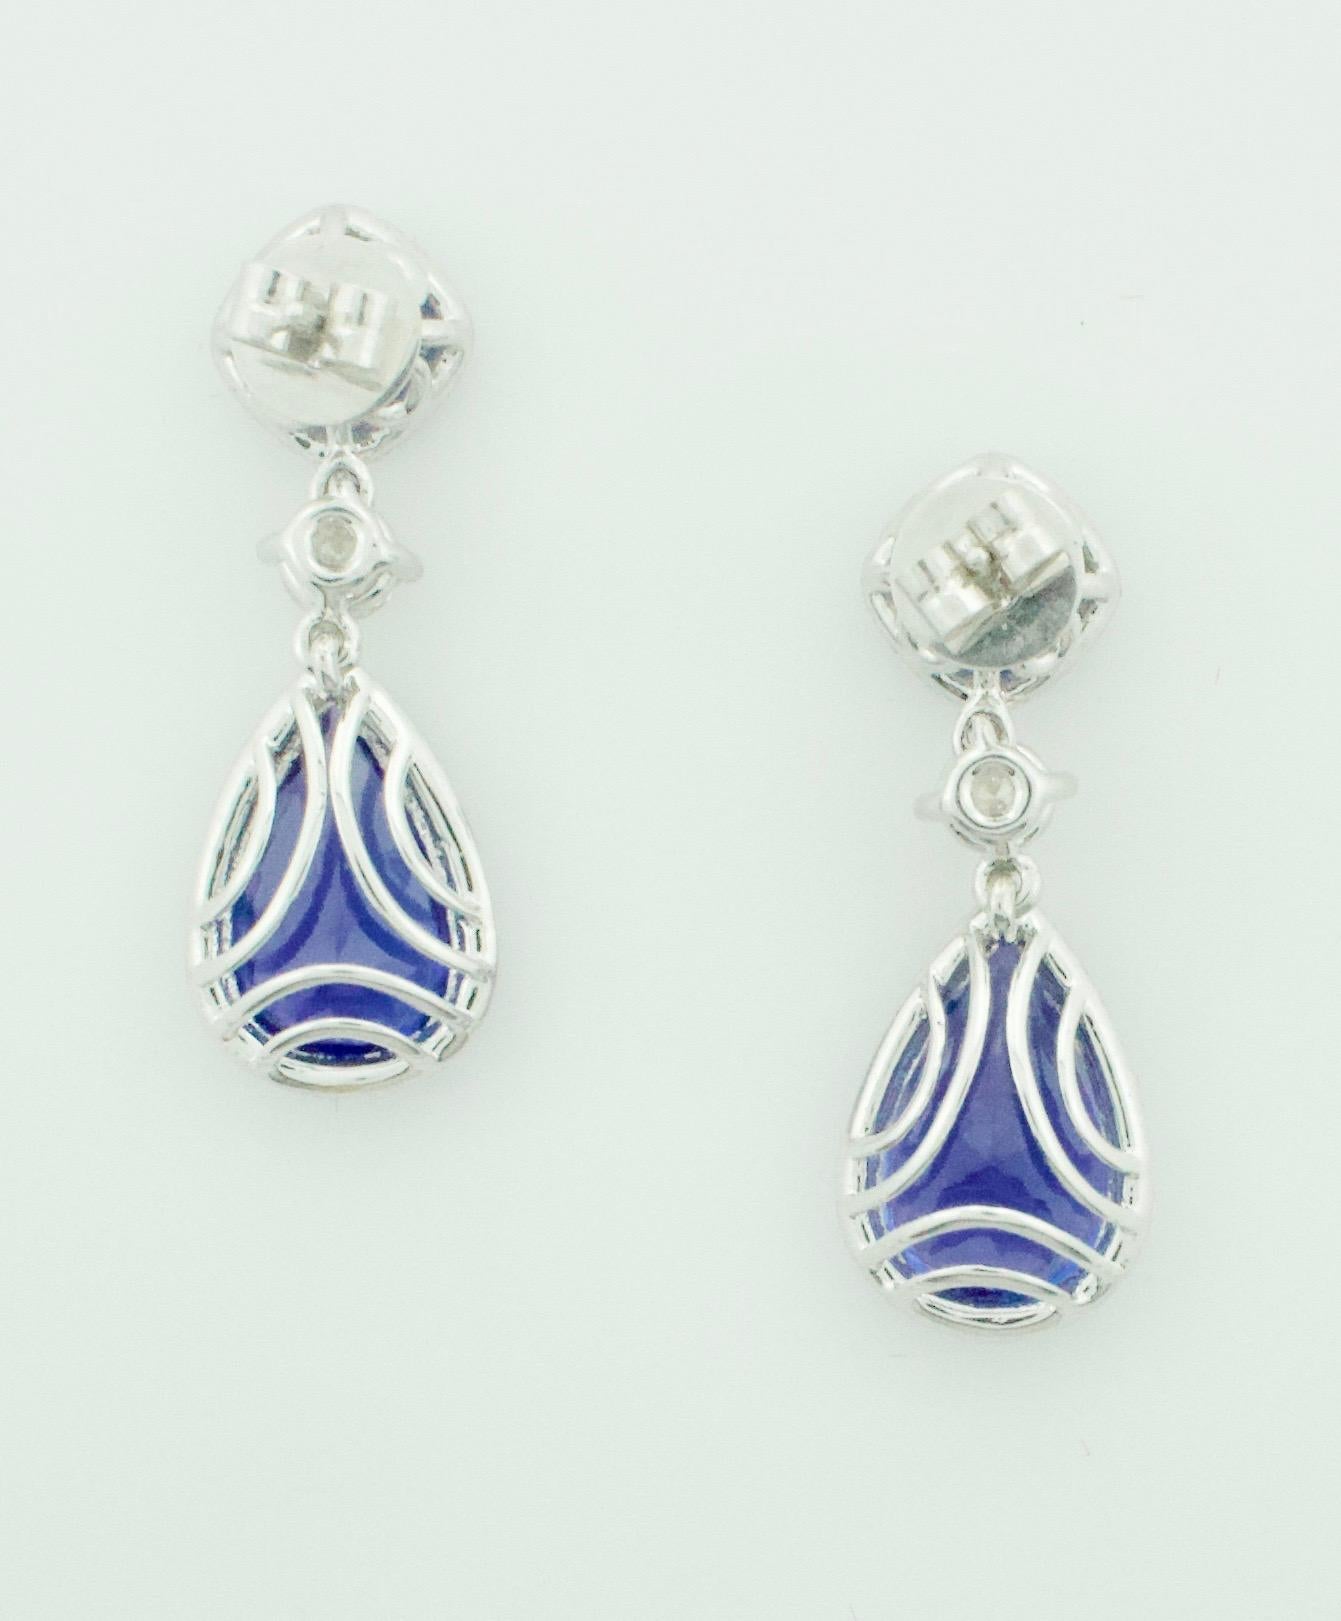 Gorgeous Tanzanite and Diamond Dangling Earrings in 18k For Sale 1